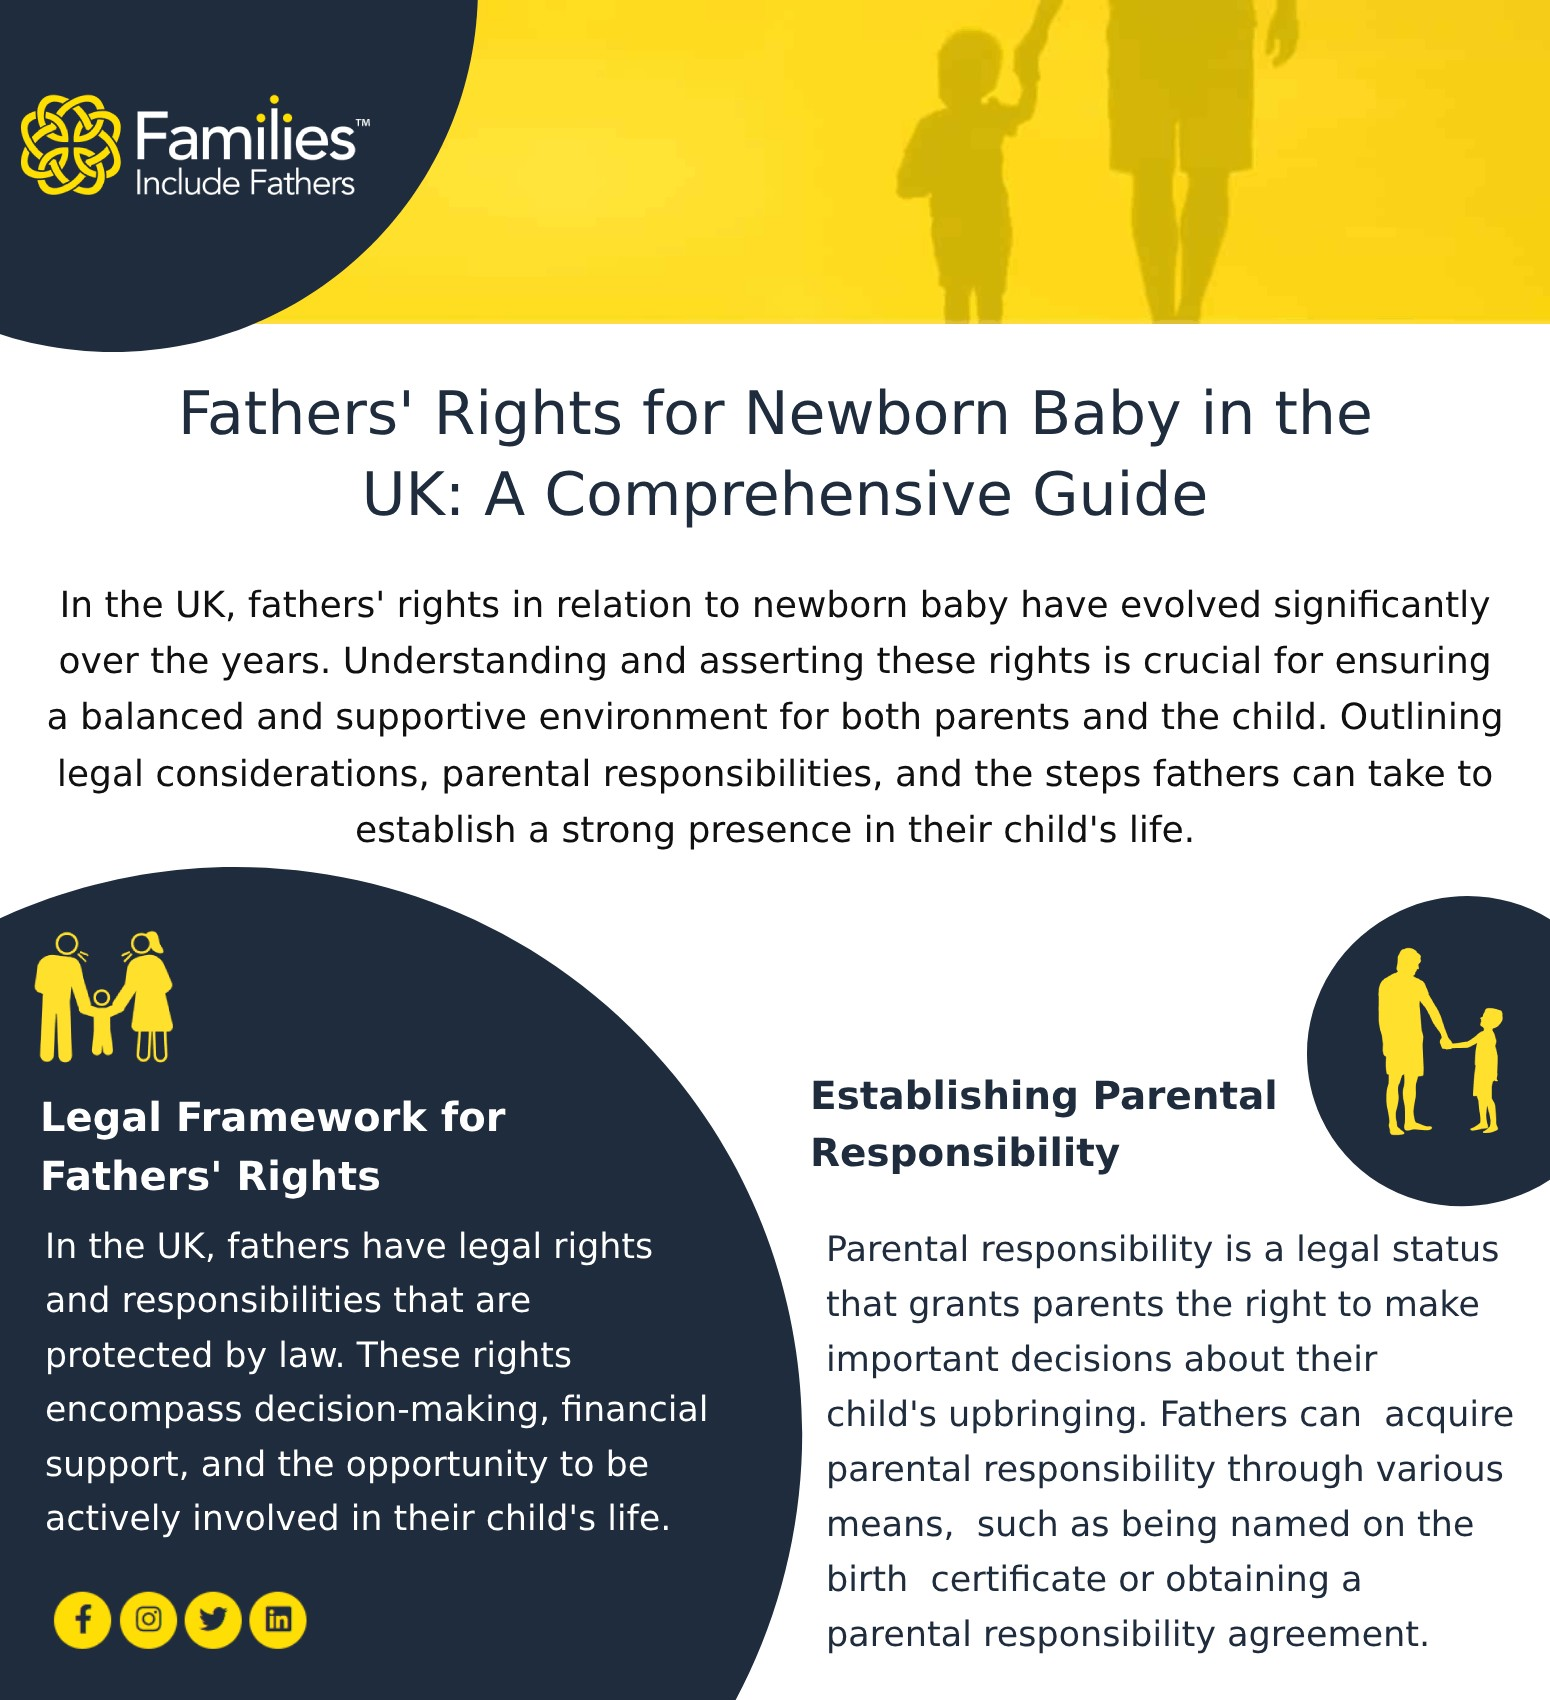 Fathers' Rights for Newborn Baby in the UK: A Comprehensive Guide